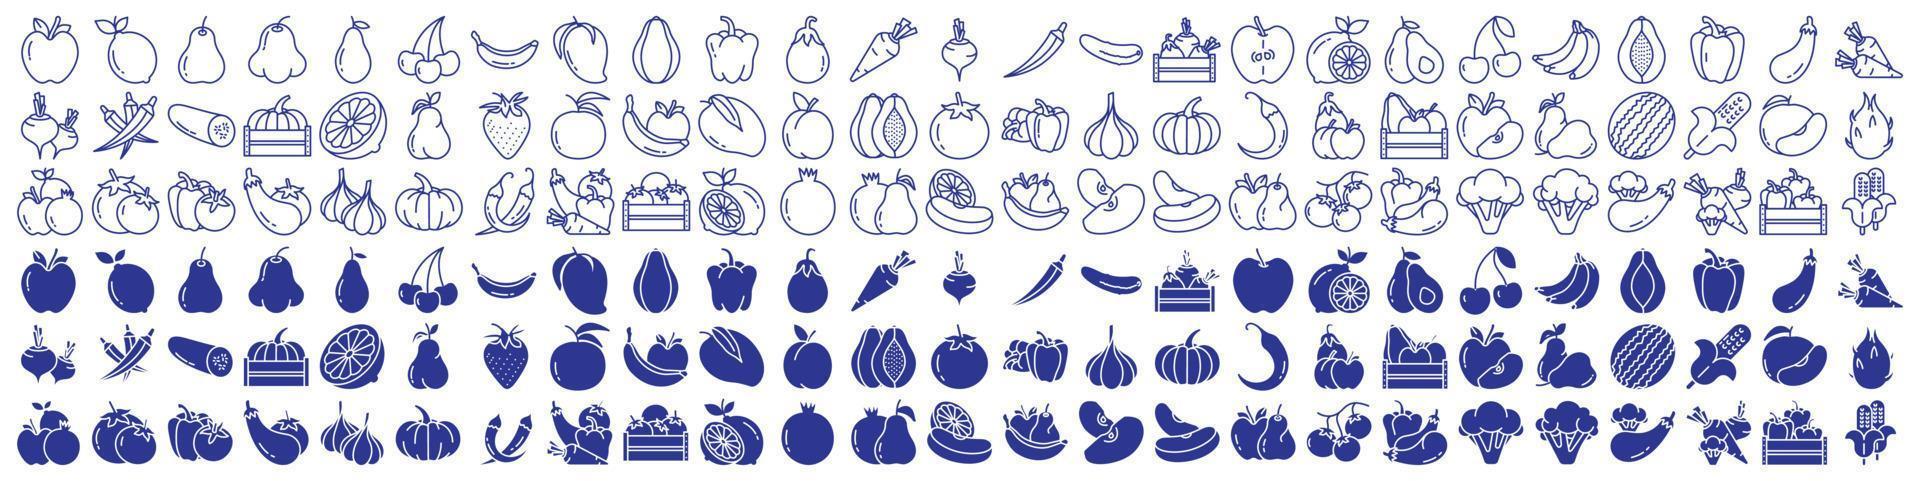 Collection of icons related to Fruits and Vegetables, including icons like Apple, Lemon, Pear, Avocado and more. vector illustrations, Pixel Perfect